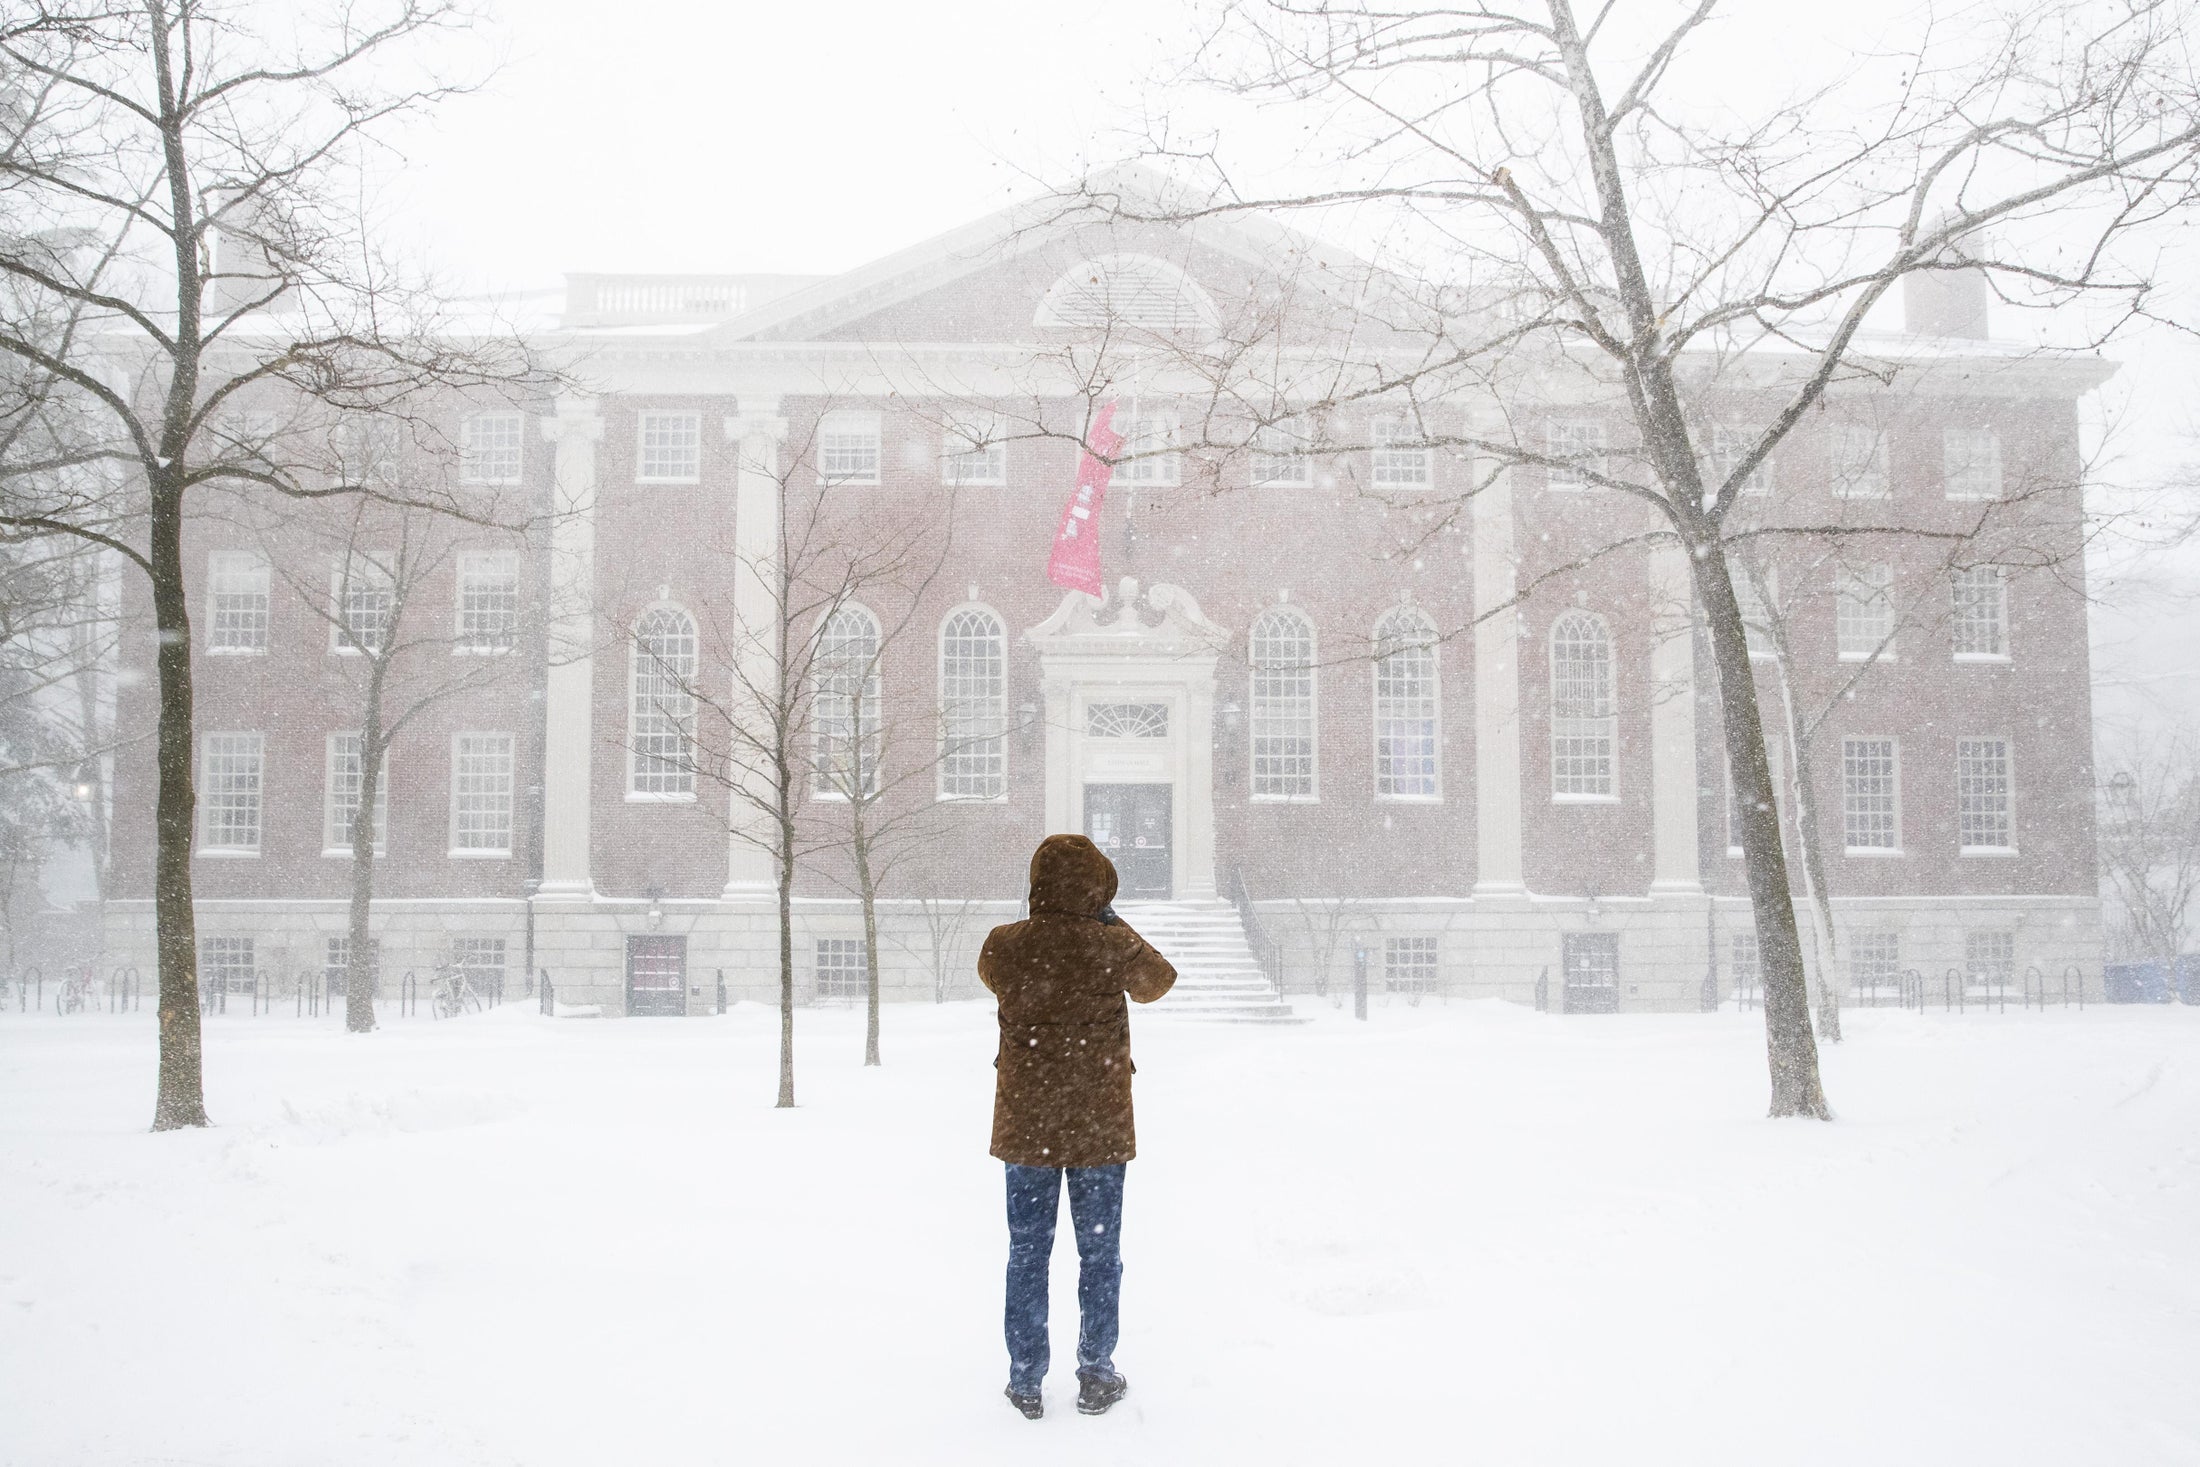 A man takes pictures of the snow on campus at Harvard University during a snowstorm on January 29, 2022 in Cambridge, Massachusetts Adam Glanzman:Getty Images